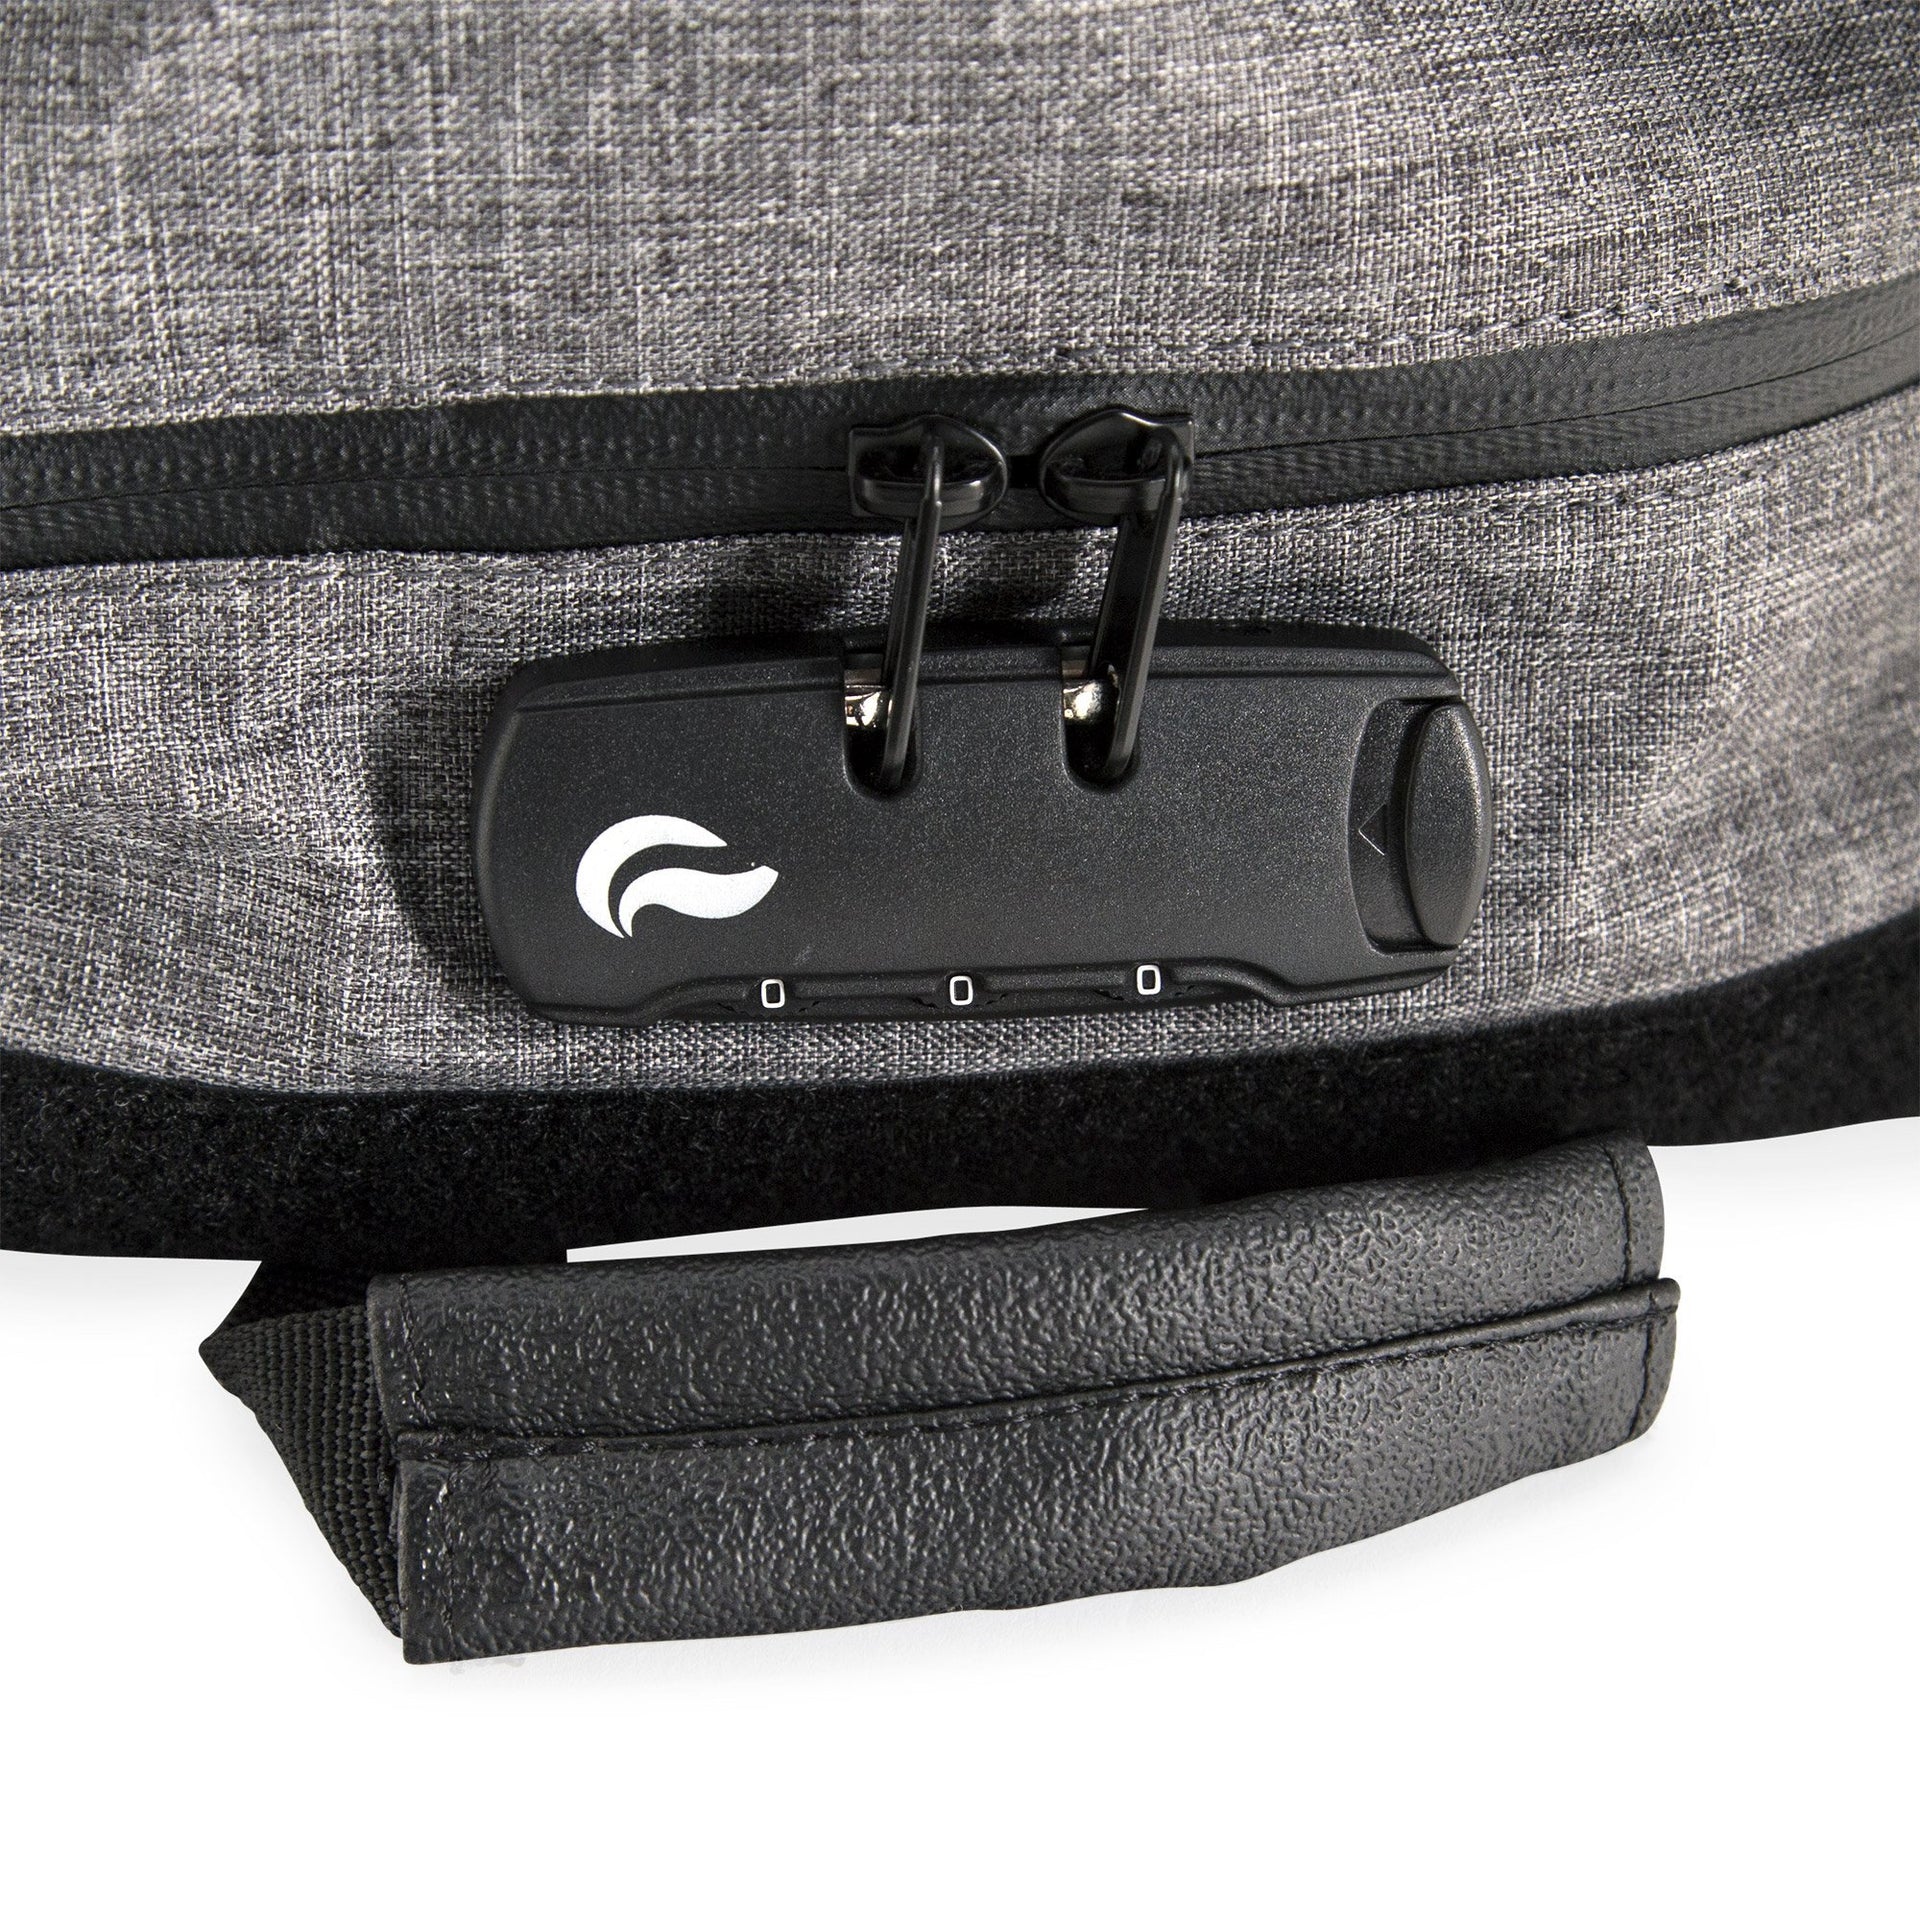 Skunk Smell Proof Combo Lock Sling Bag / $ 69.99 at 420 Science